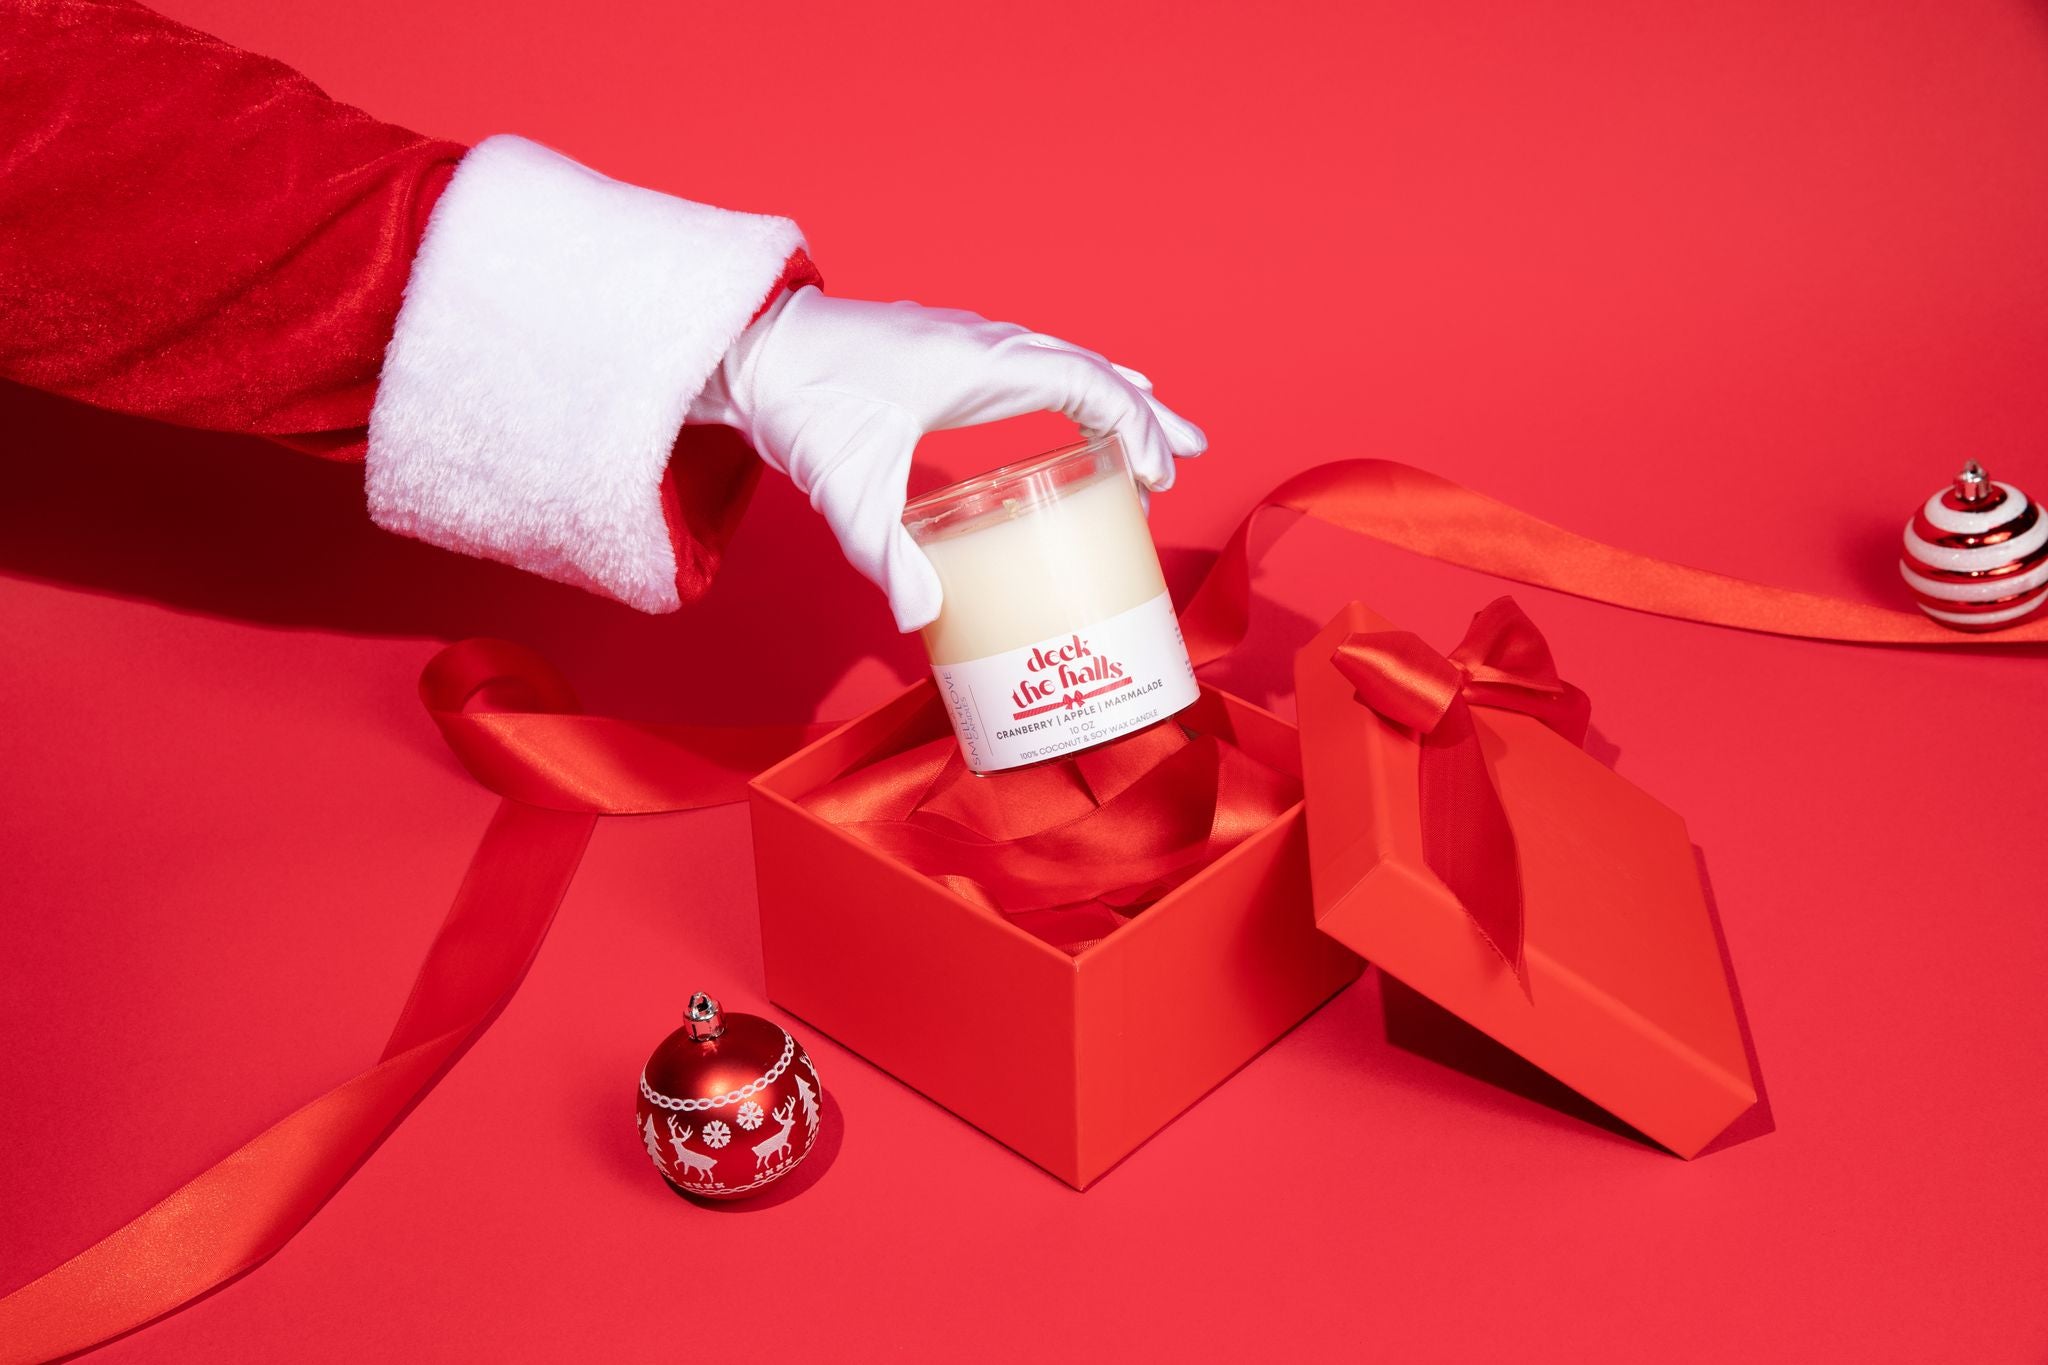 Wishing You a Merry Christmas and Celebrating Our Candle-Loving Community